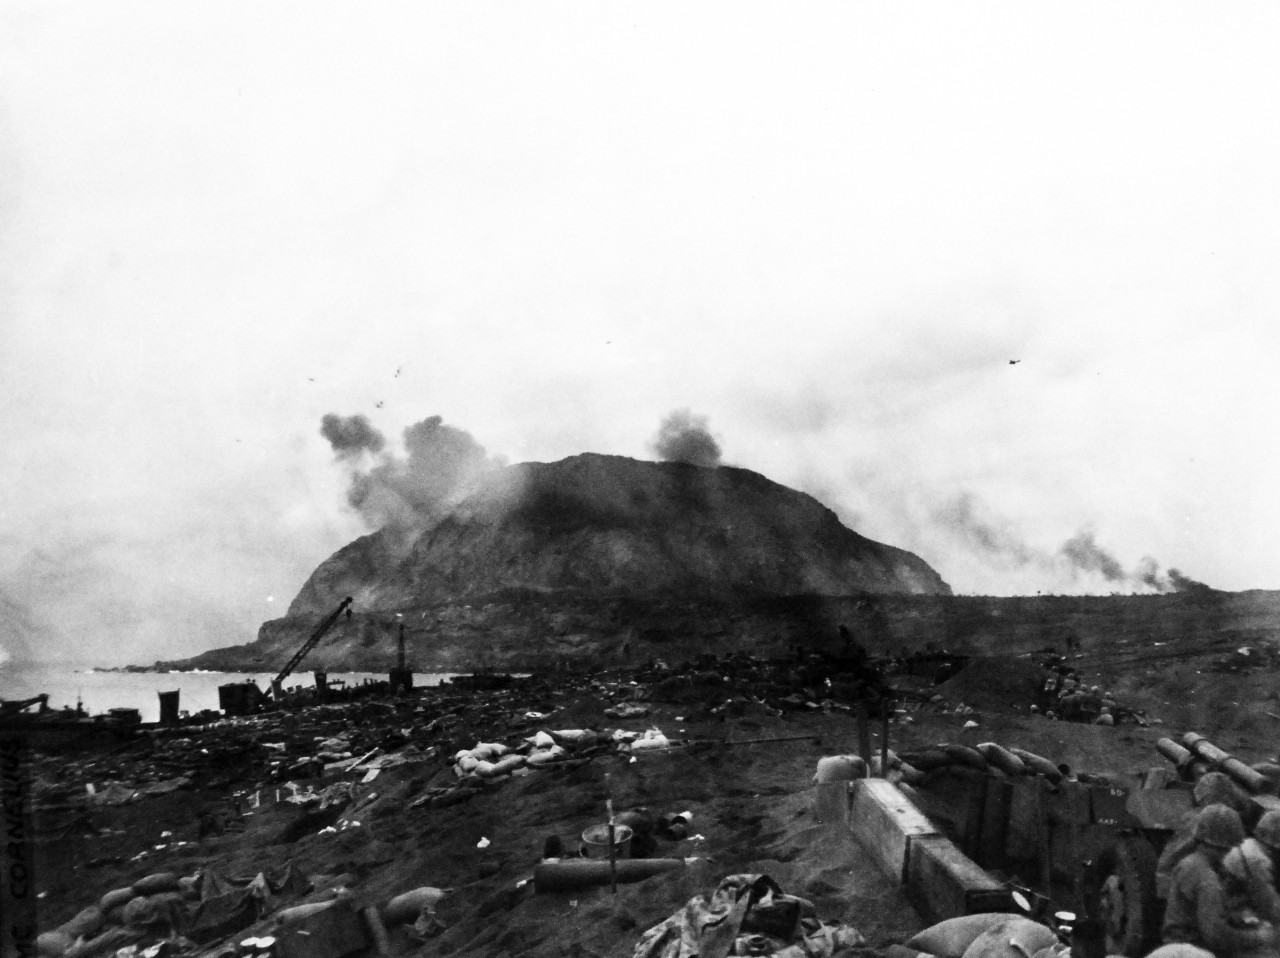 127-GW-306-110141:  Battle for Iwo Jima, February-March 1945.  Planes dive bombing Hill 556 (1004).    Photographed by SSgt M.A. Cornelius, February 21, 1945.  Official U.S. Marine Corps photograph, now in the collections of the National Archives.  (2016/02/17).